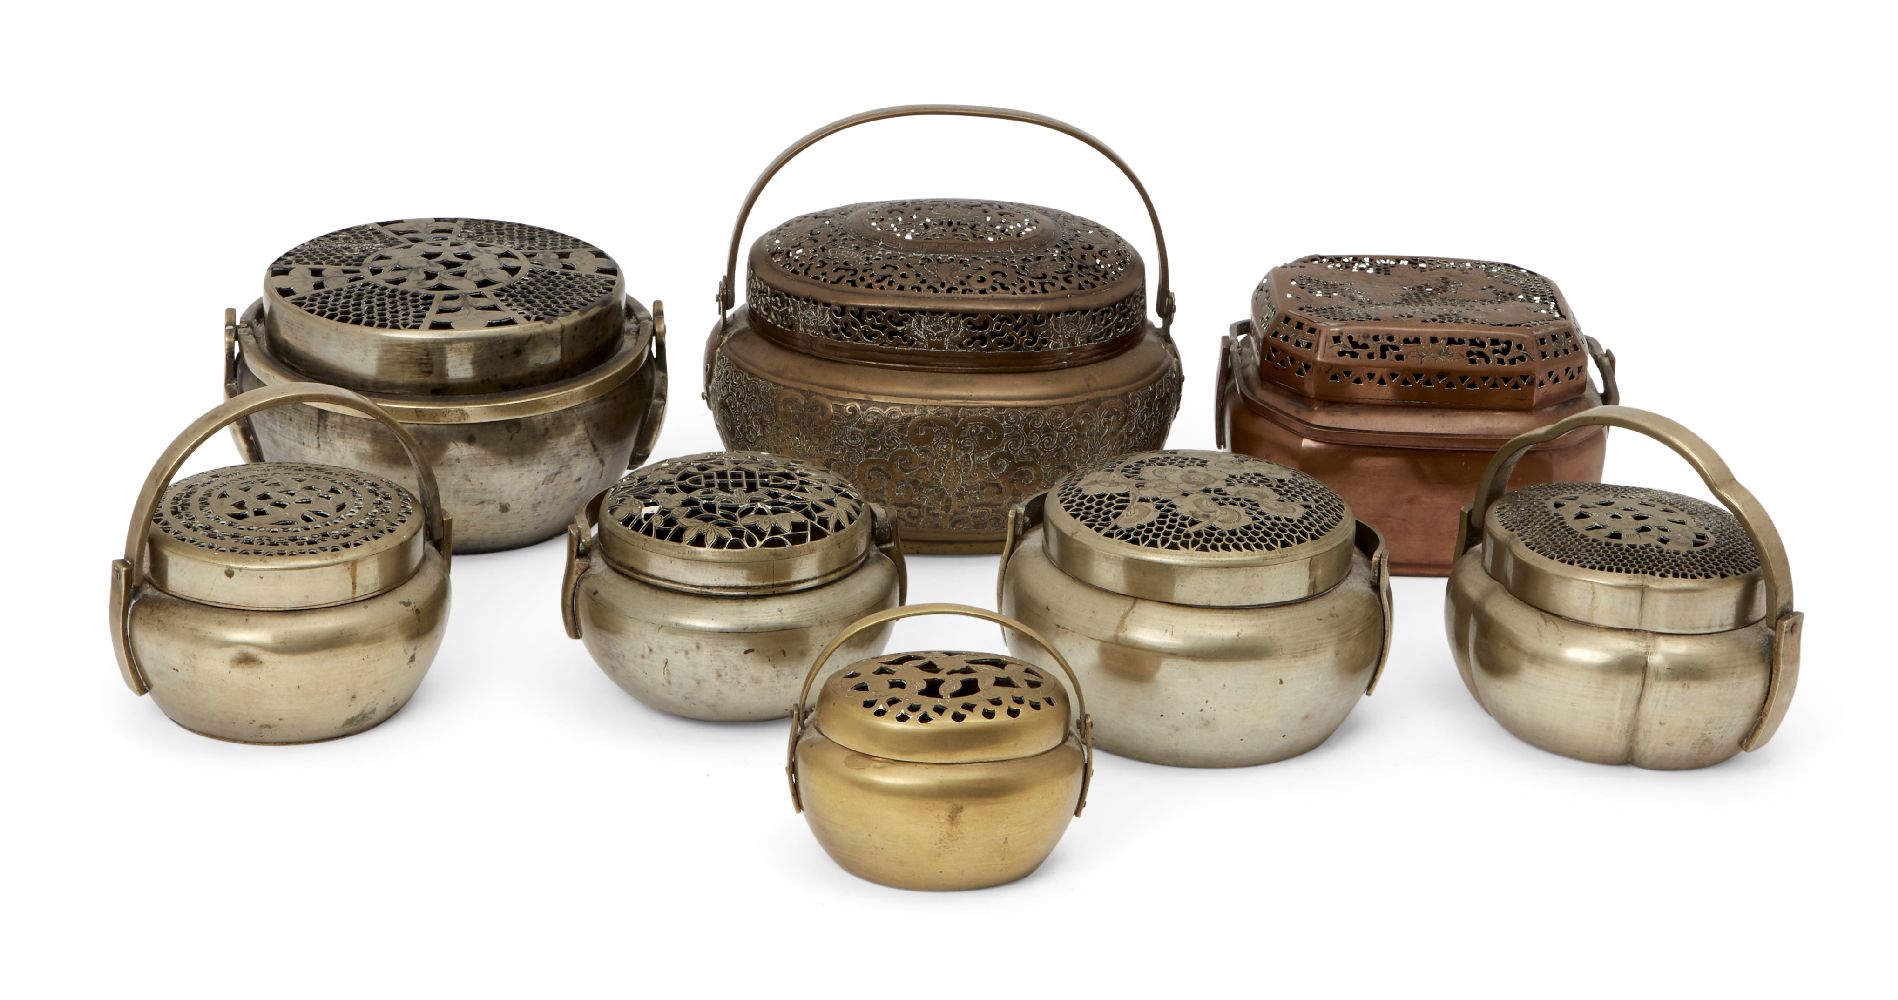 Eight Chinese metal handwarmers, 19th century - early 20th century, each with pierced floral